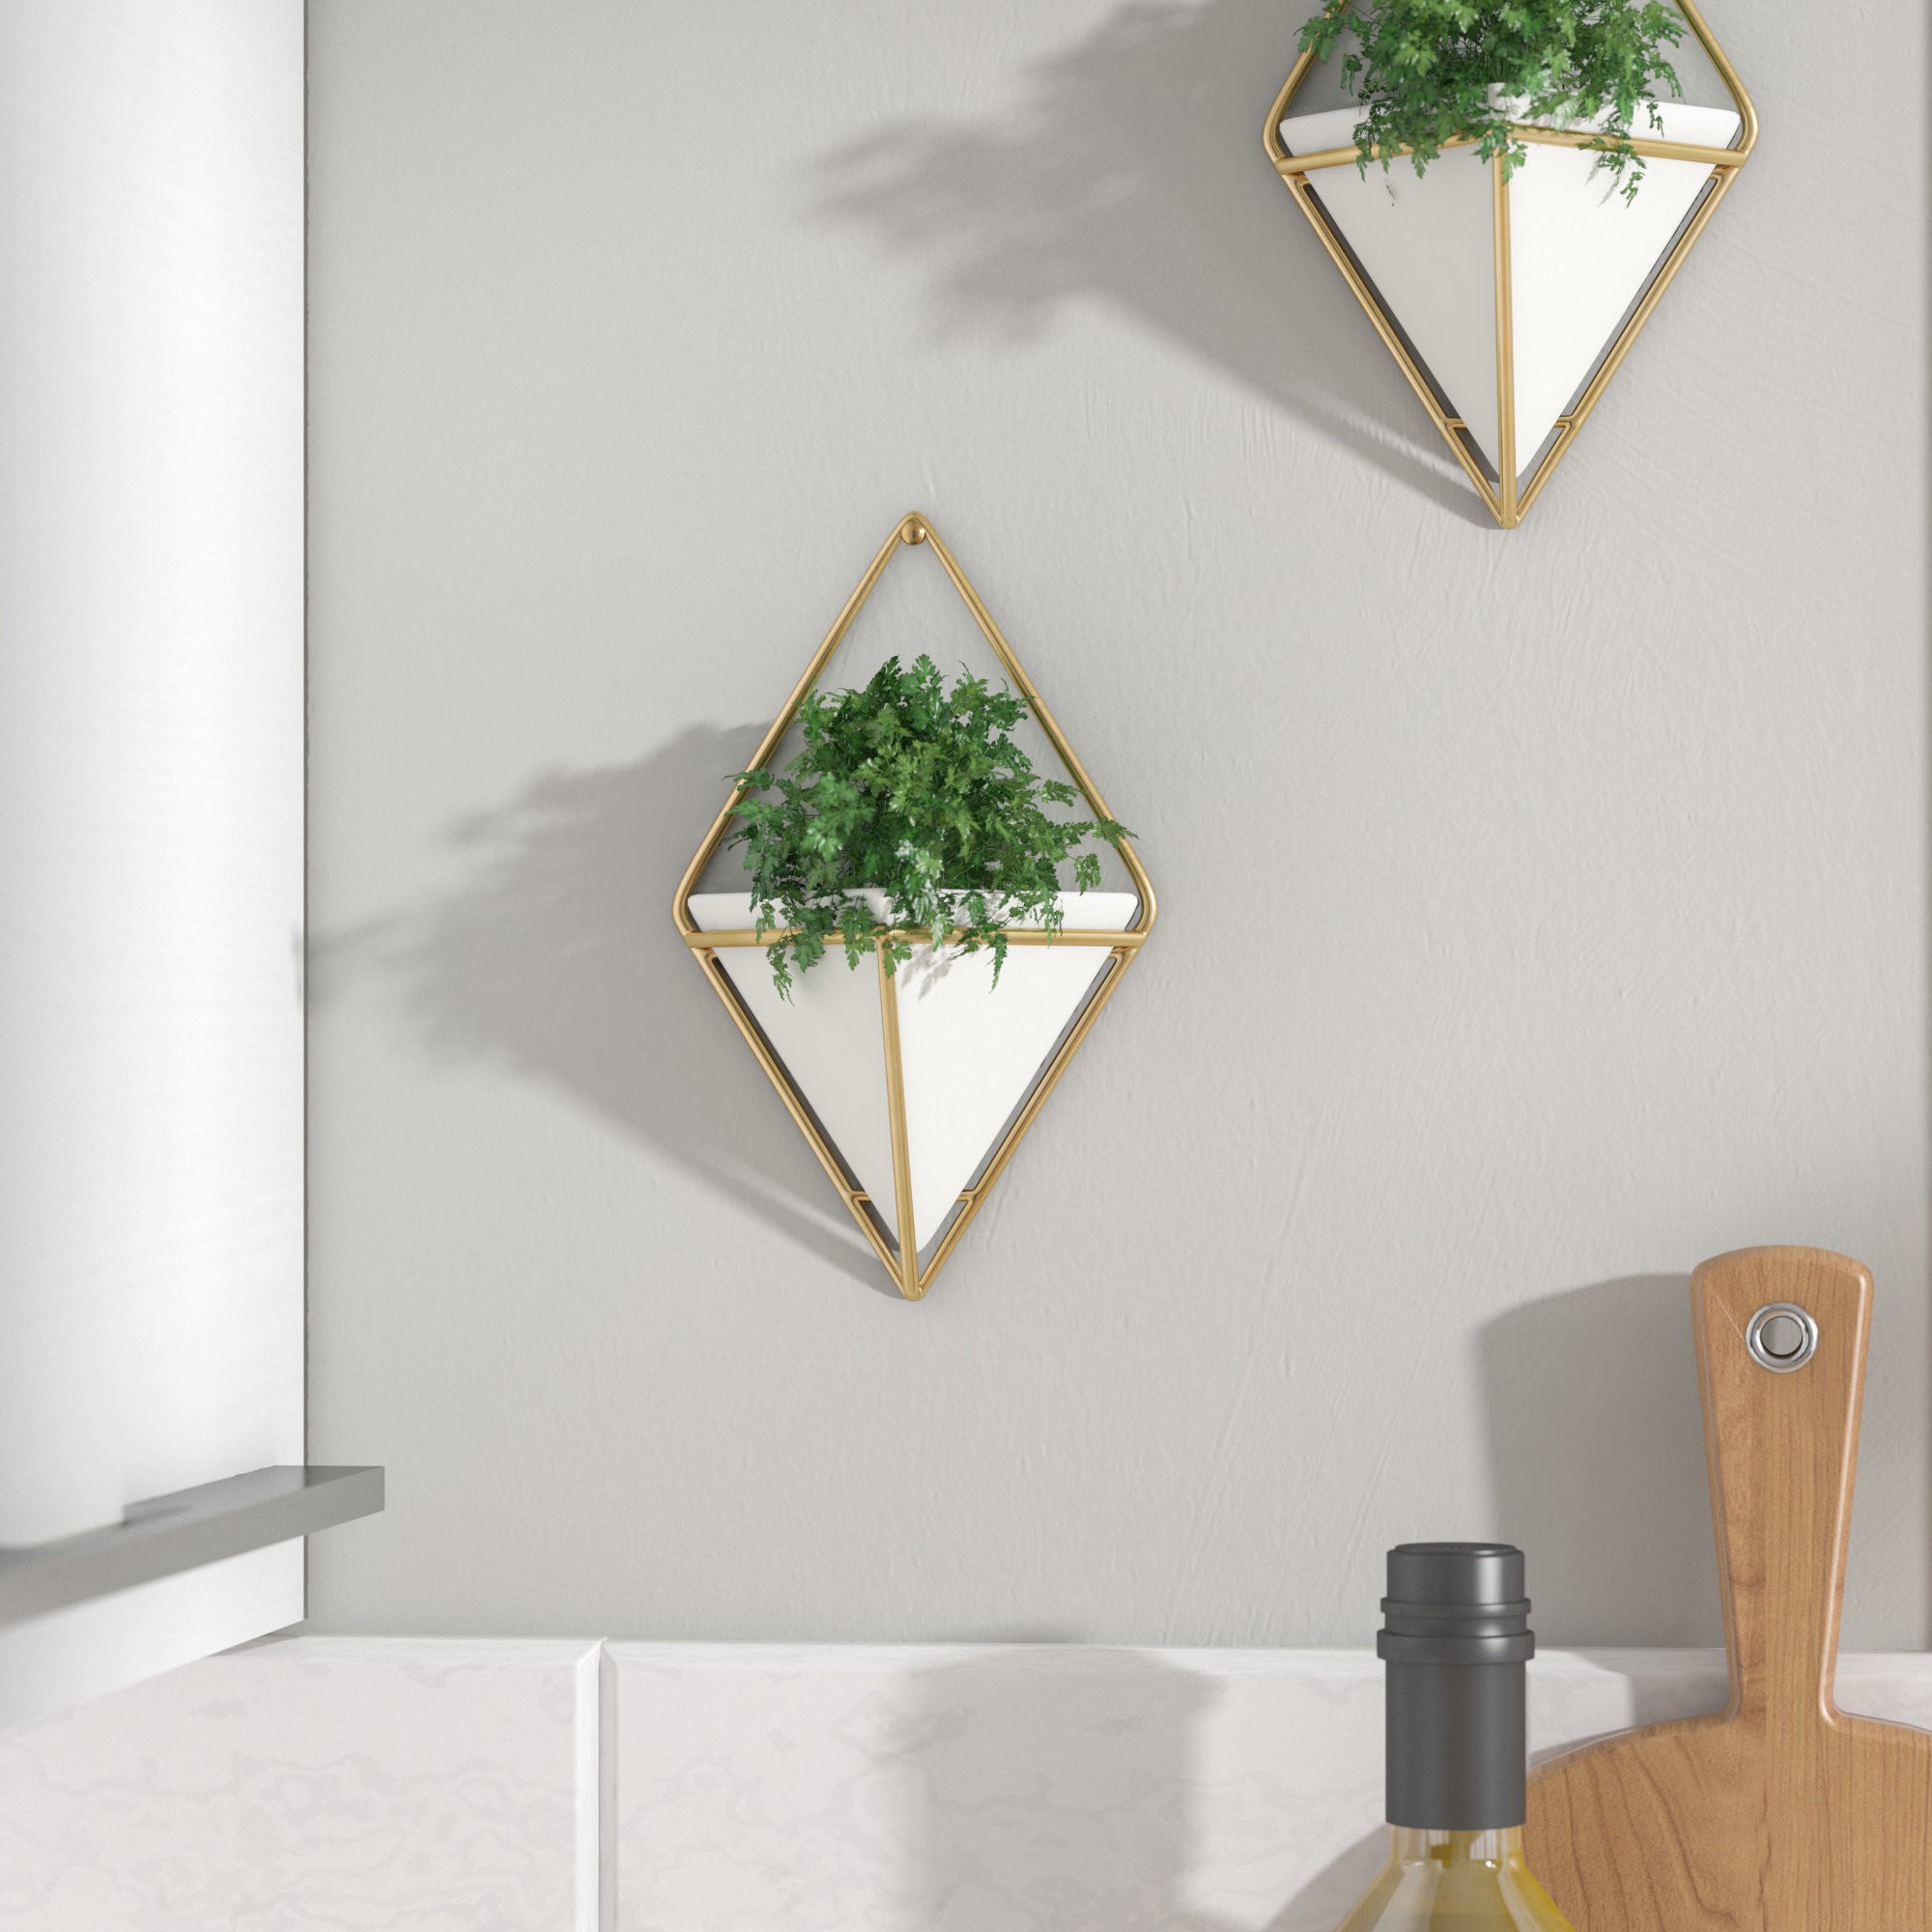 Futuristic Wall Décor Hanging Planters